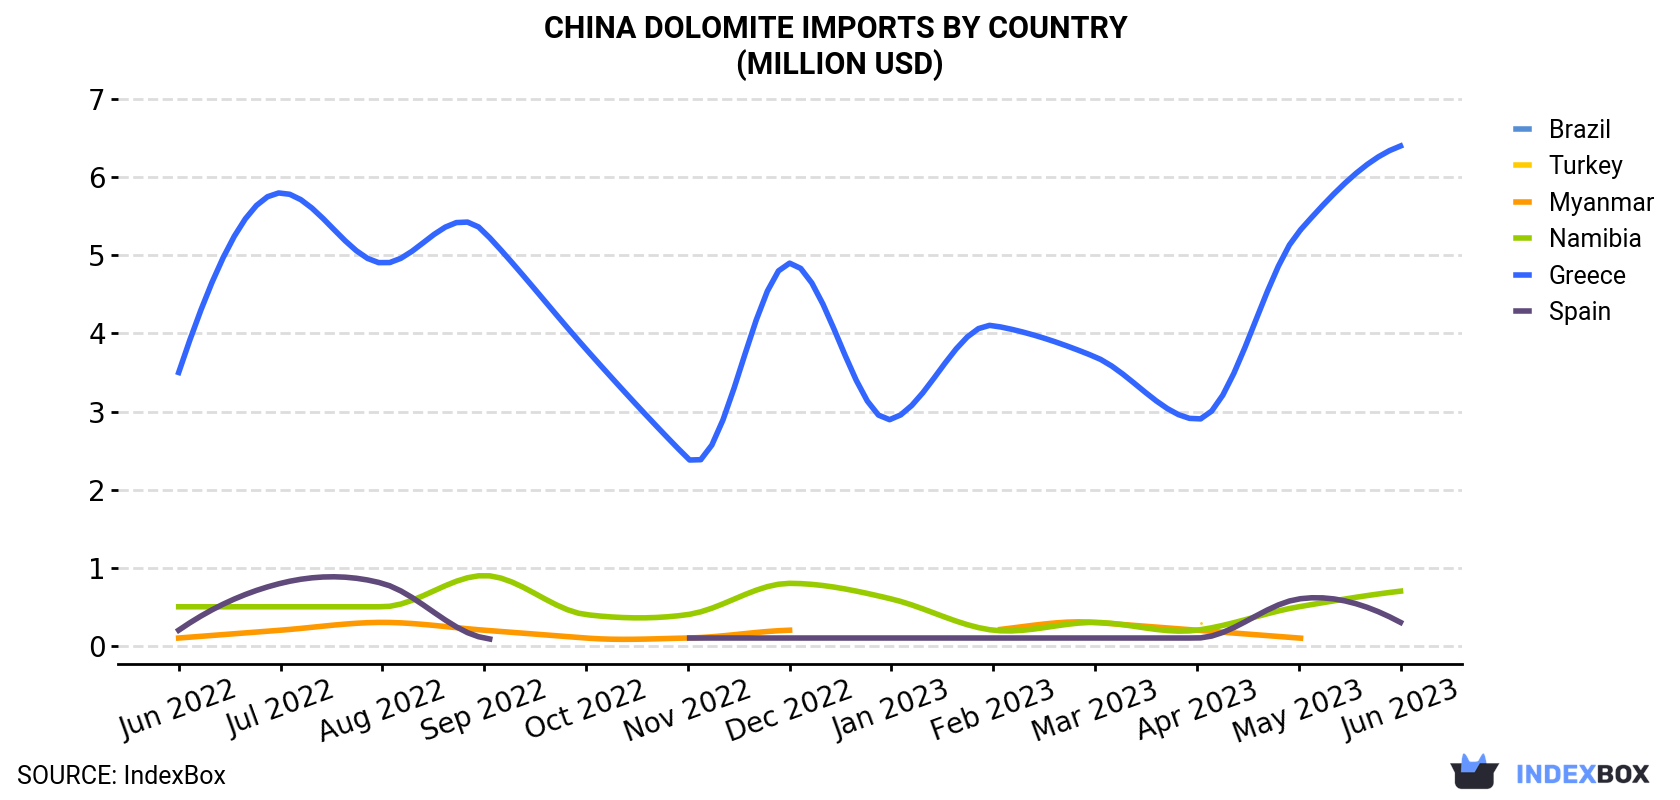 China Dolomite Imports By Country (Million USD)